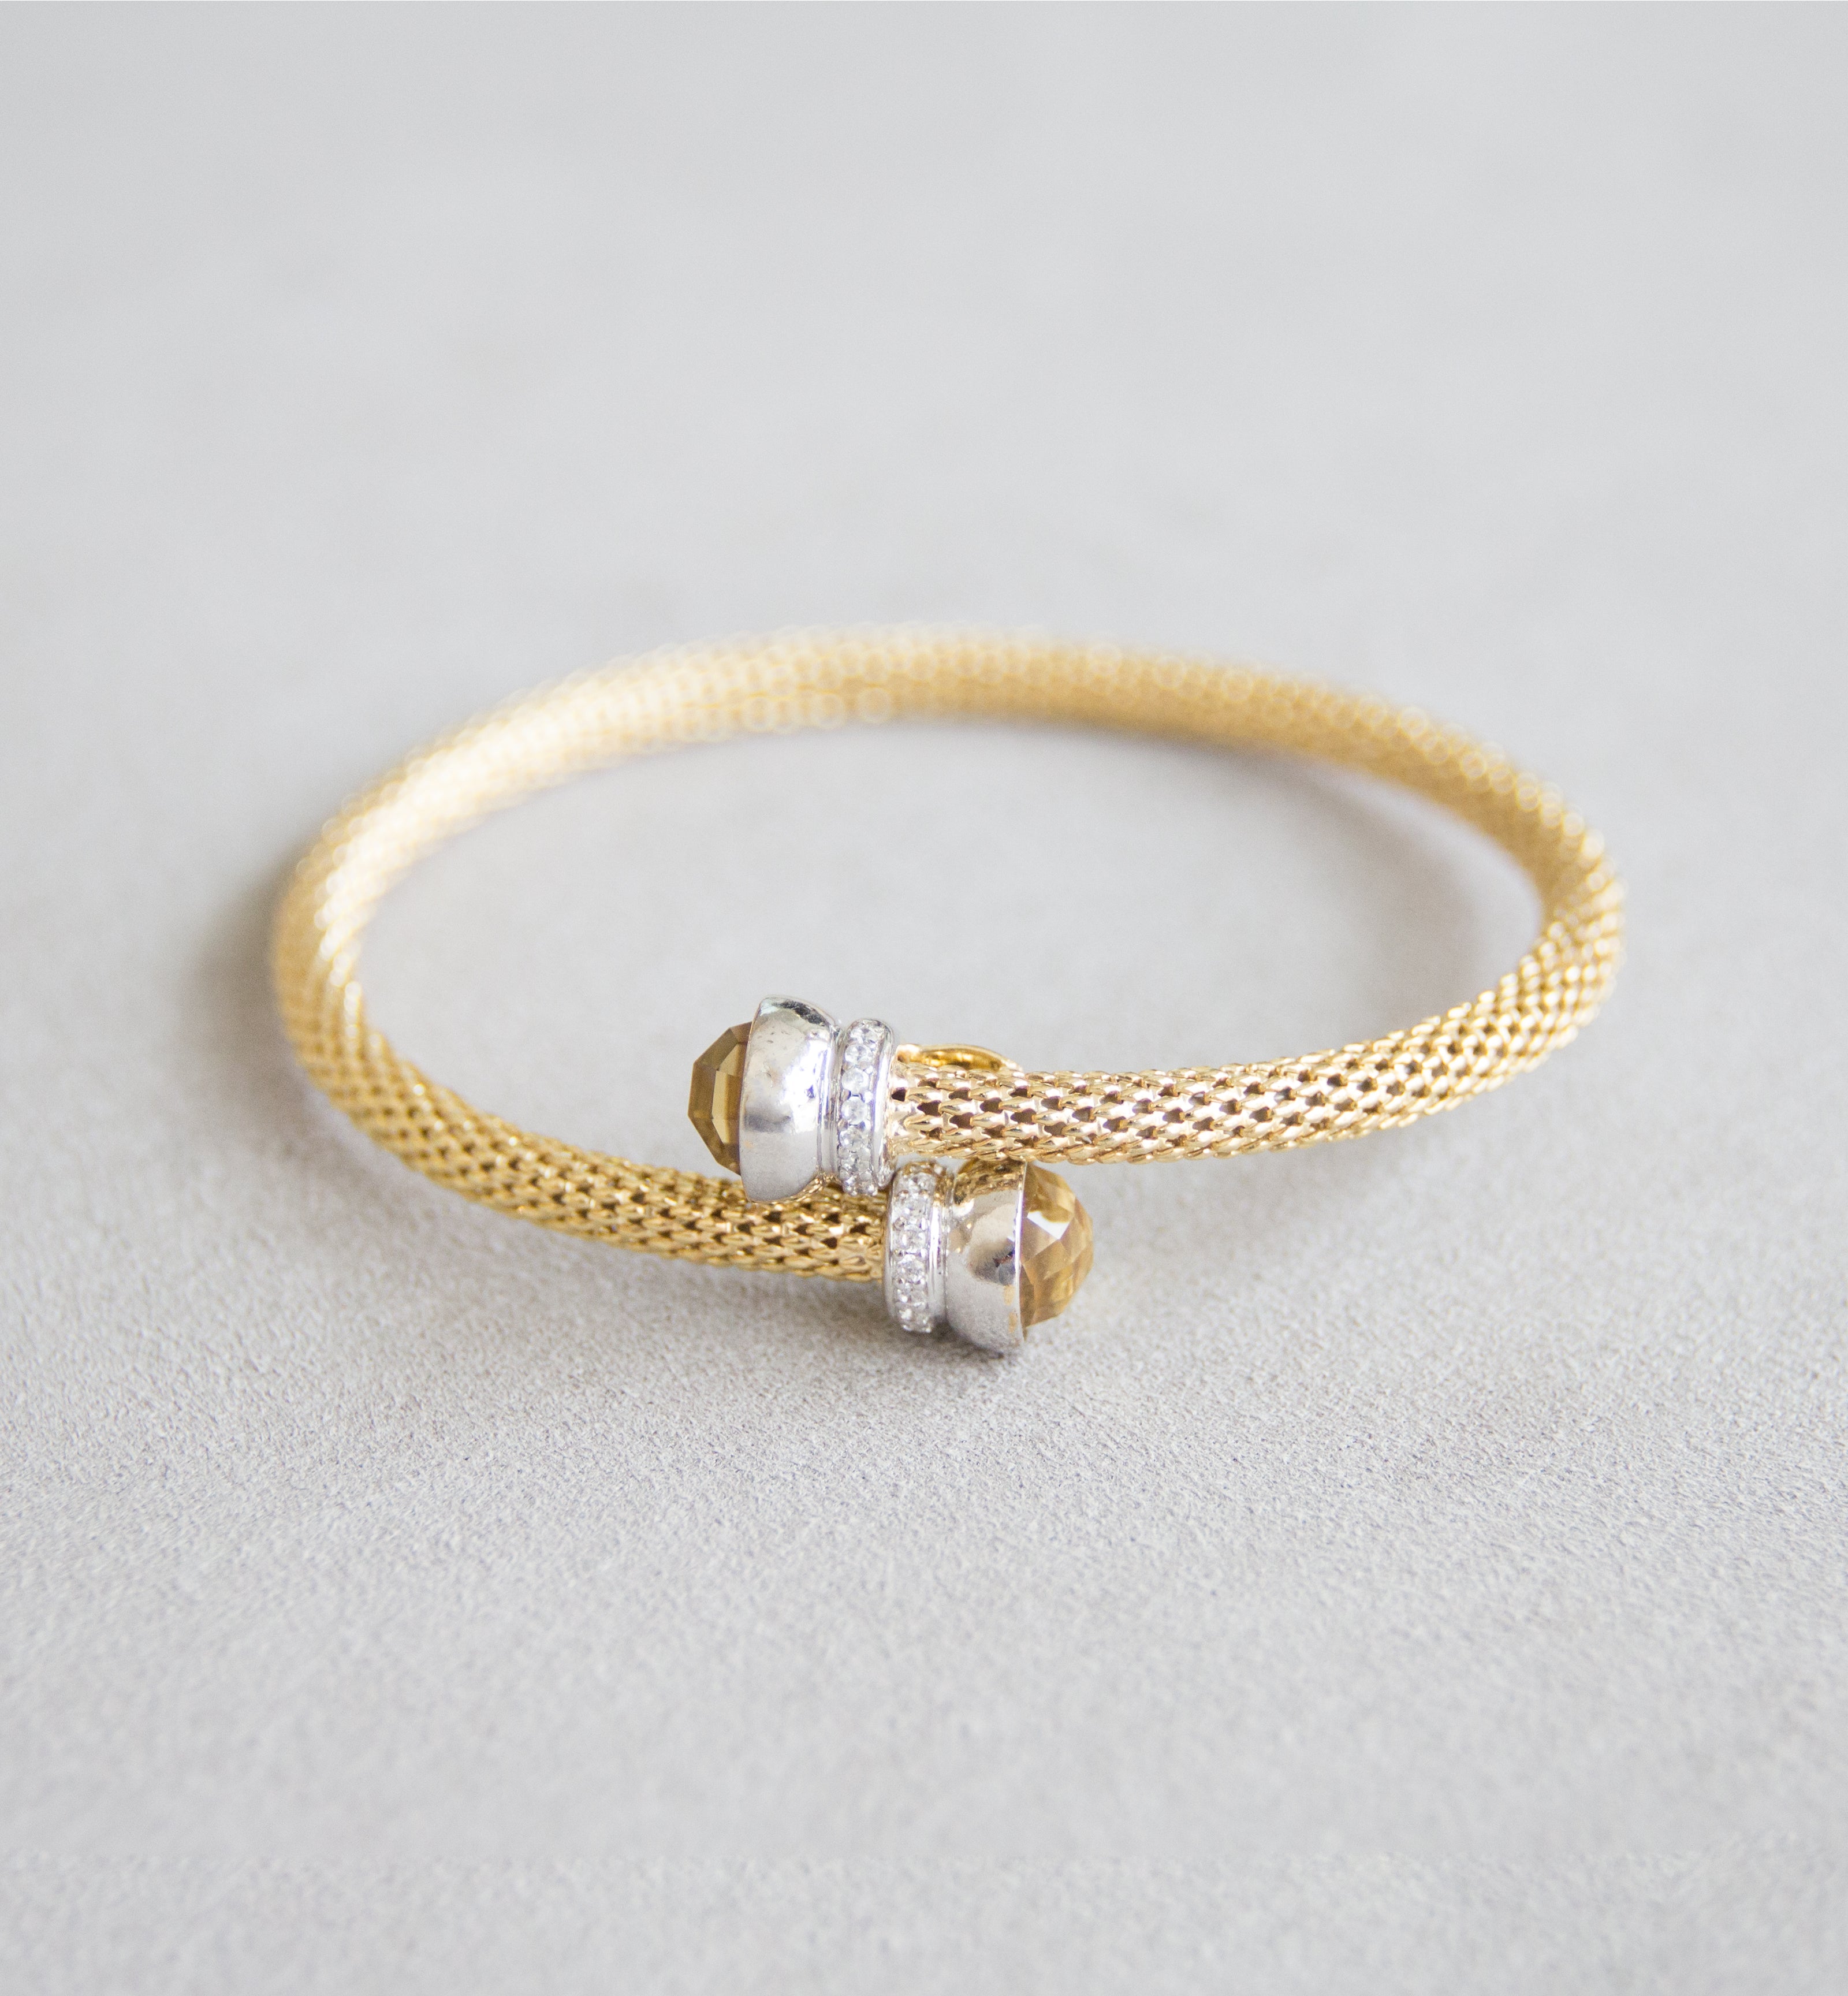 Silver 925 Bangle with Citrine Stone